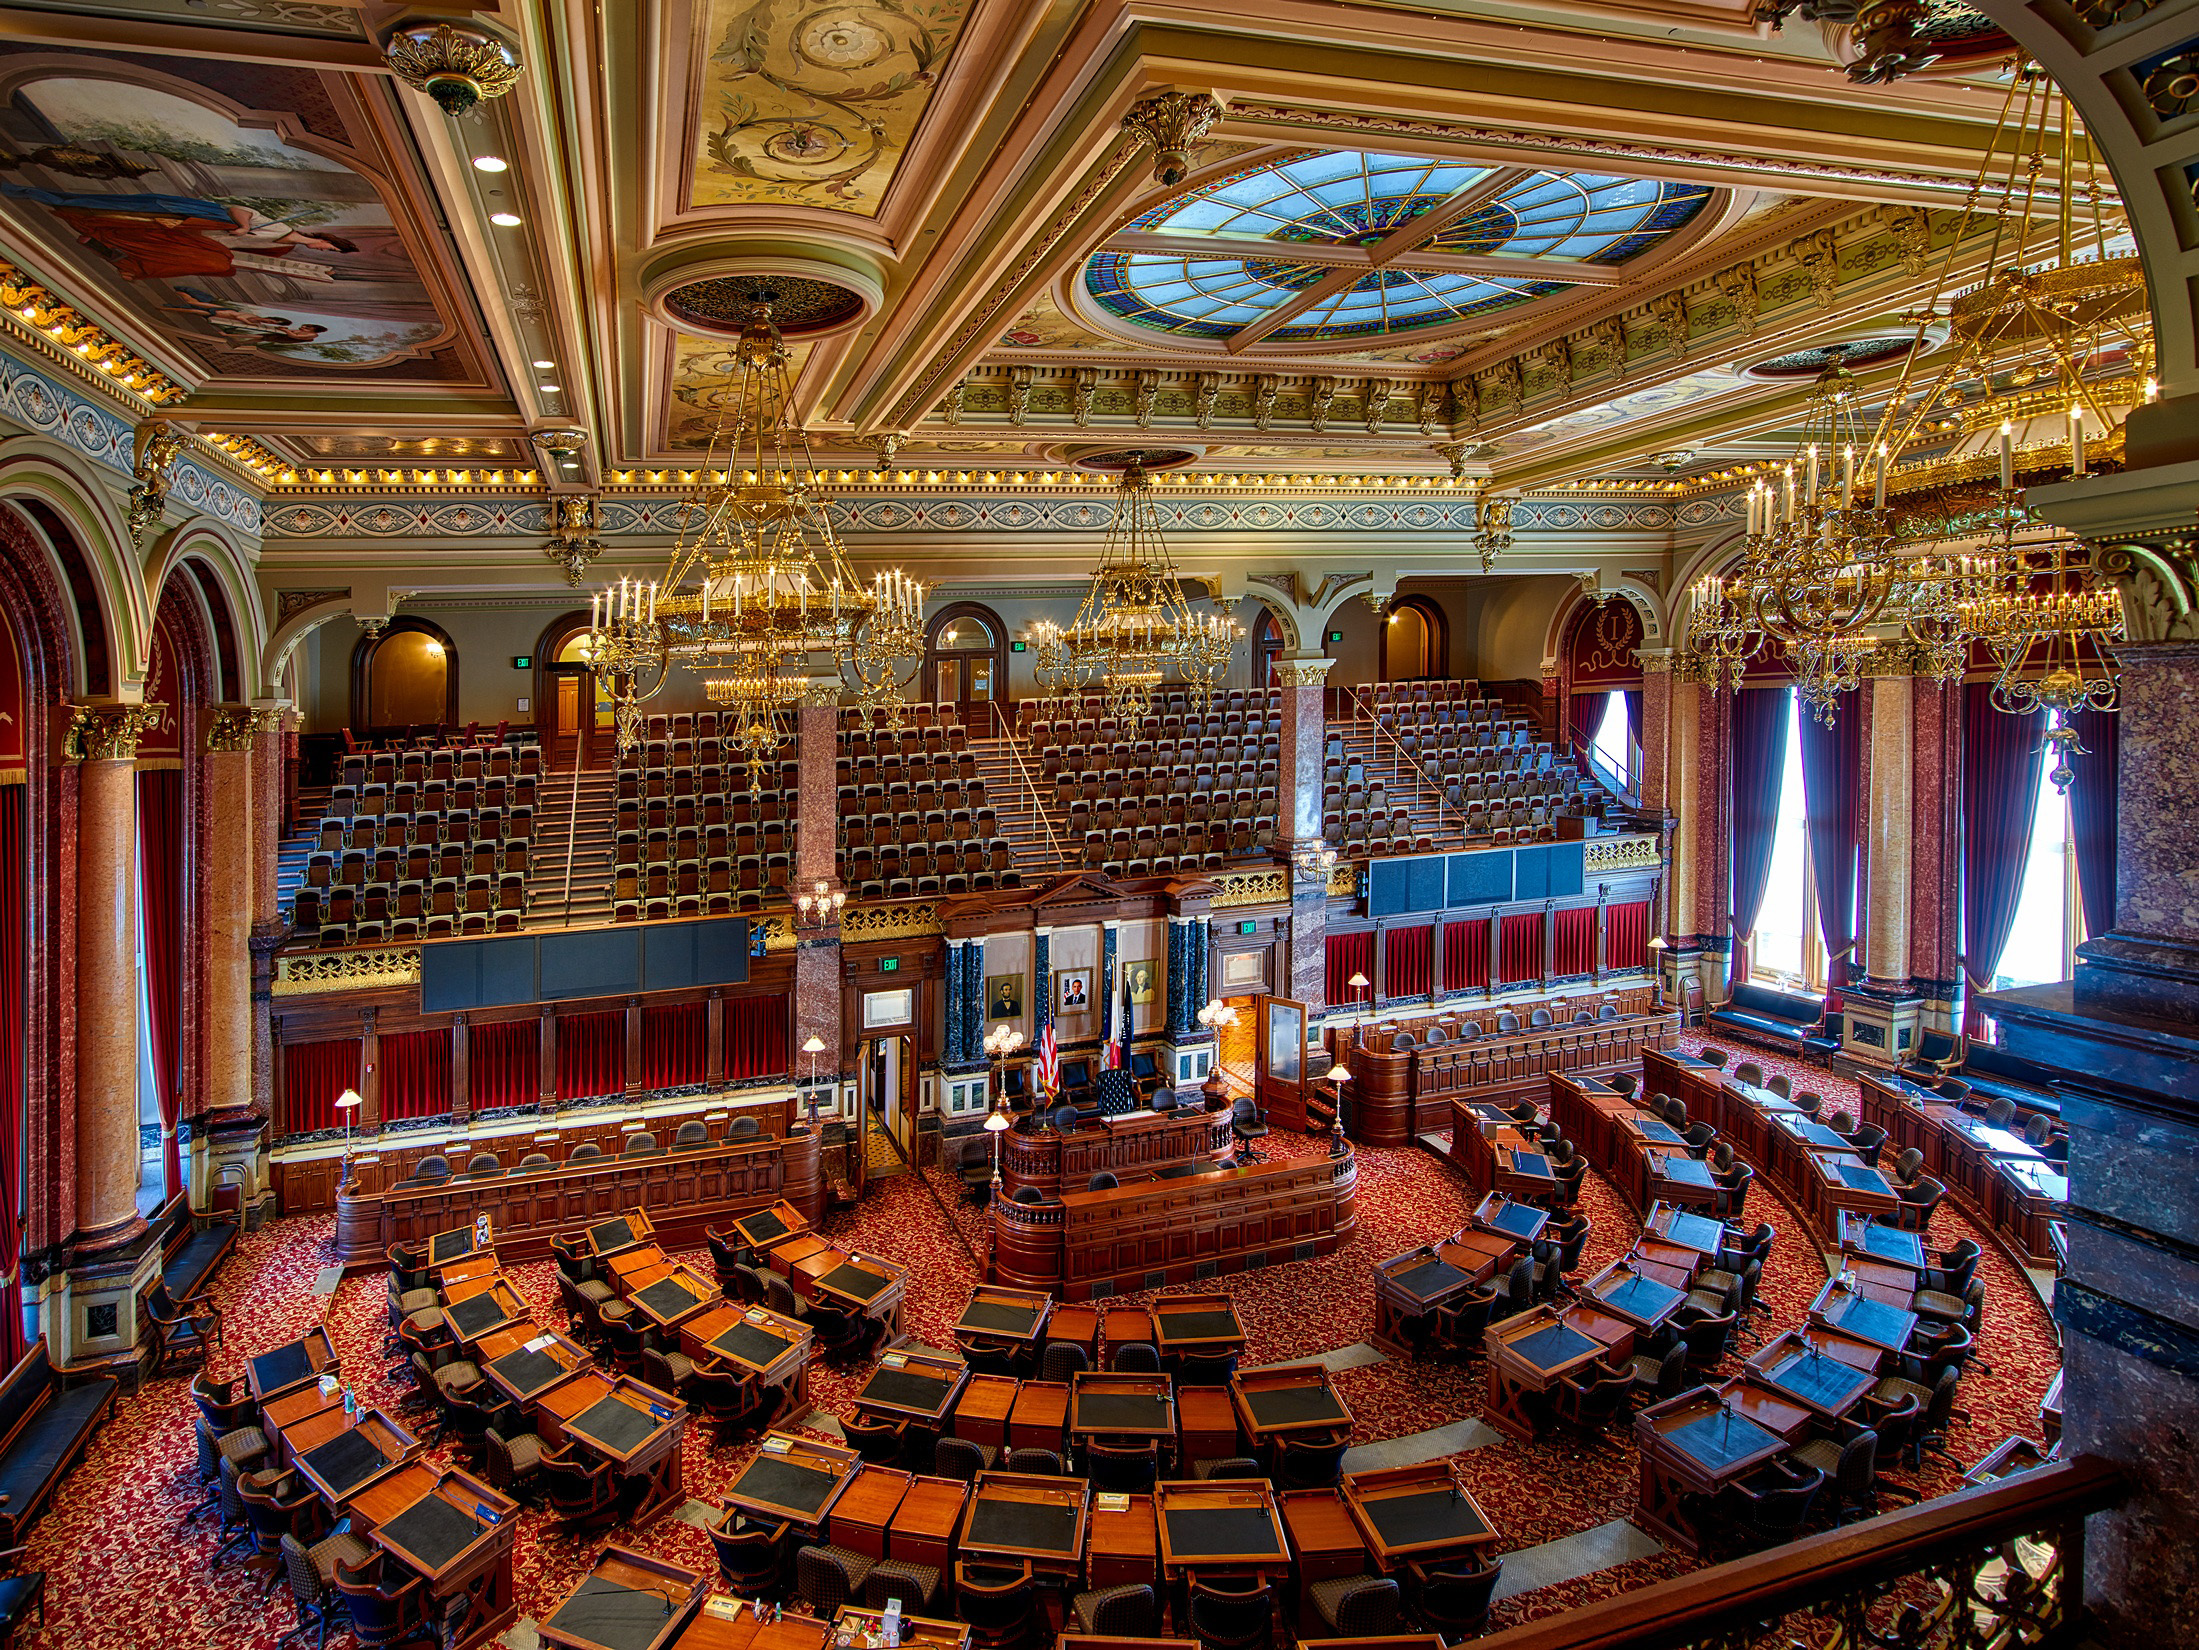 Inside the capital congress building in Des Moines, Iowa image Free